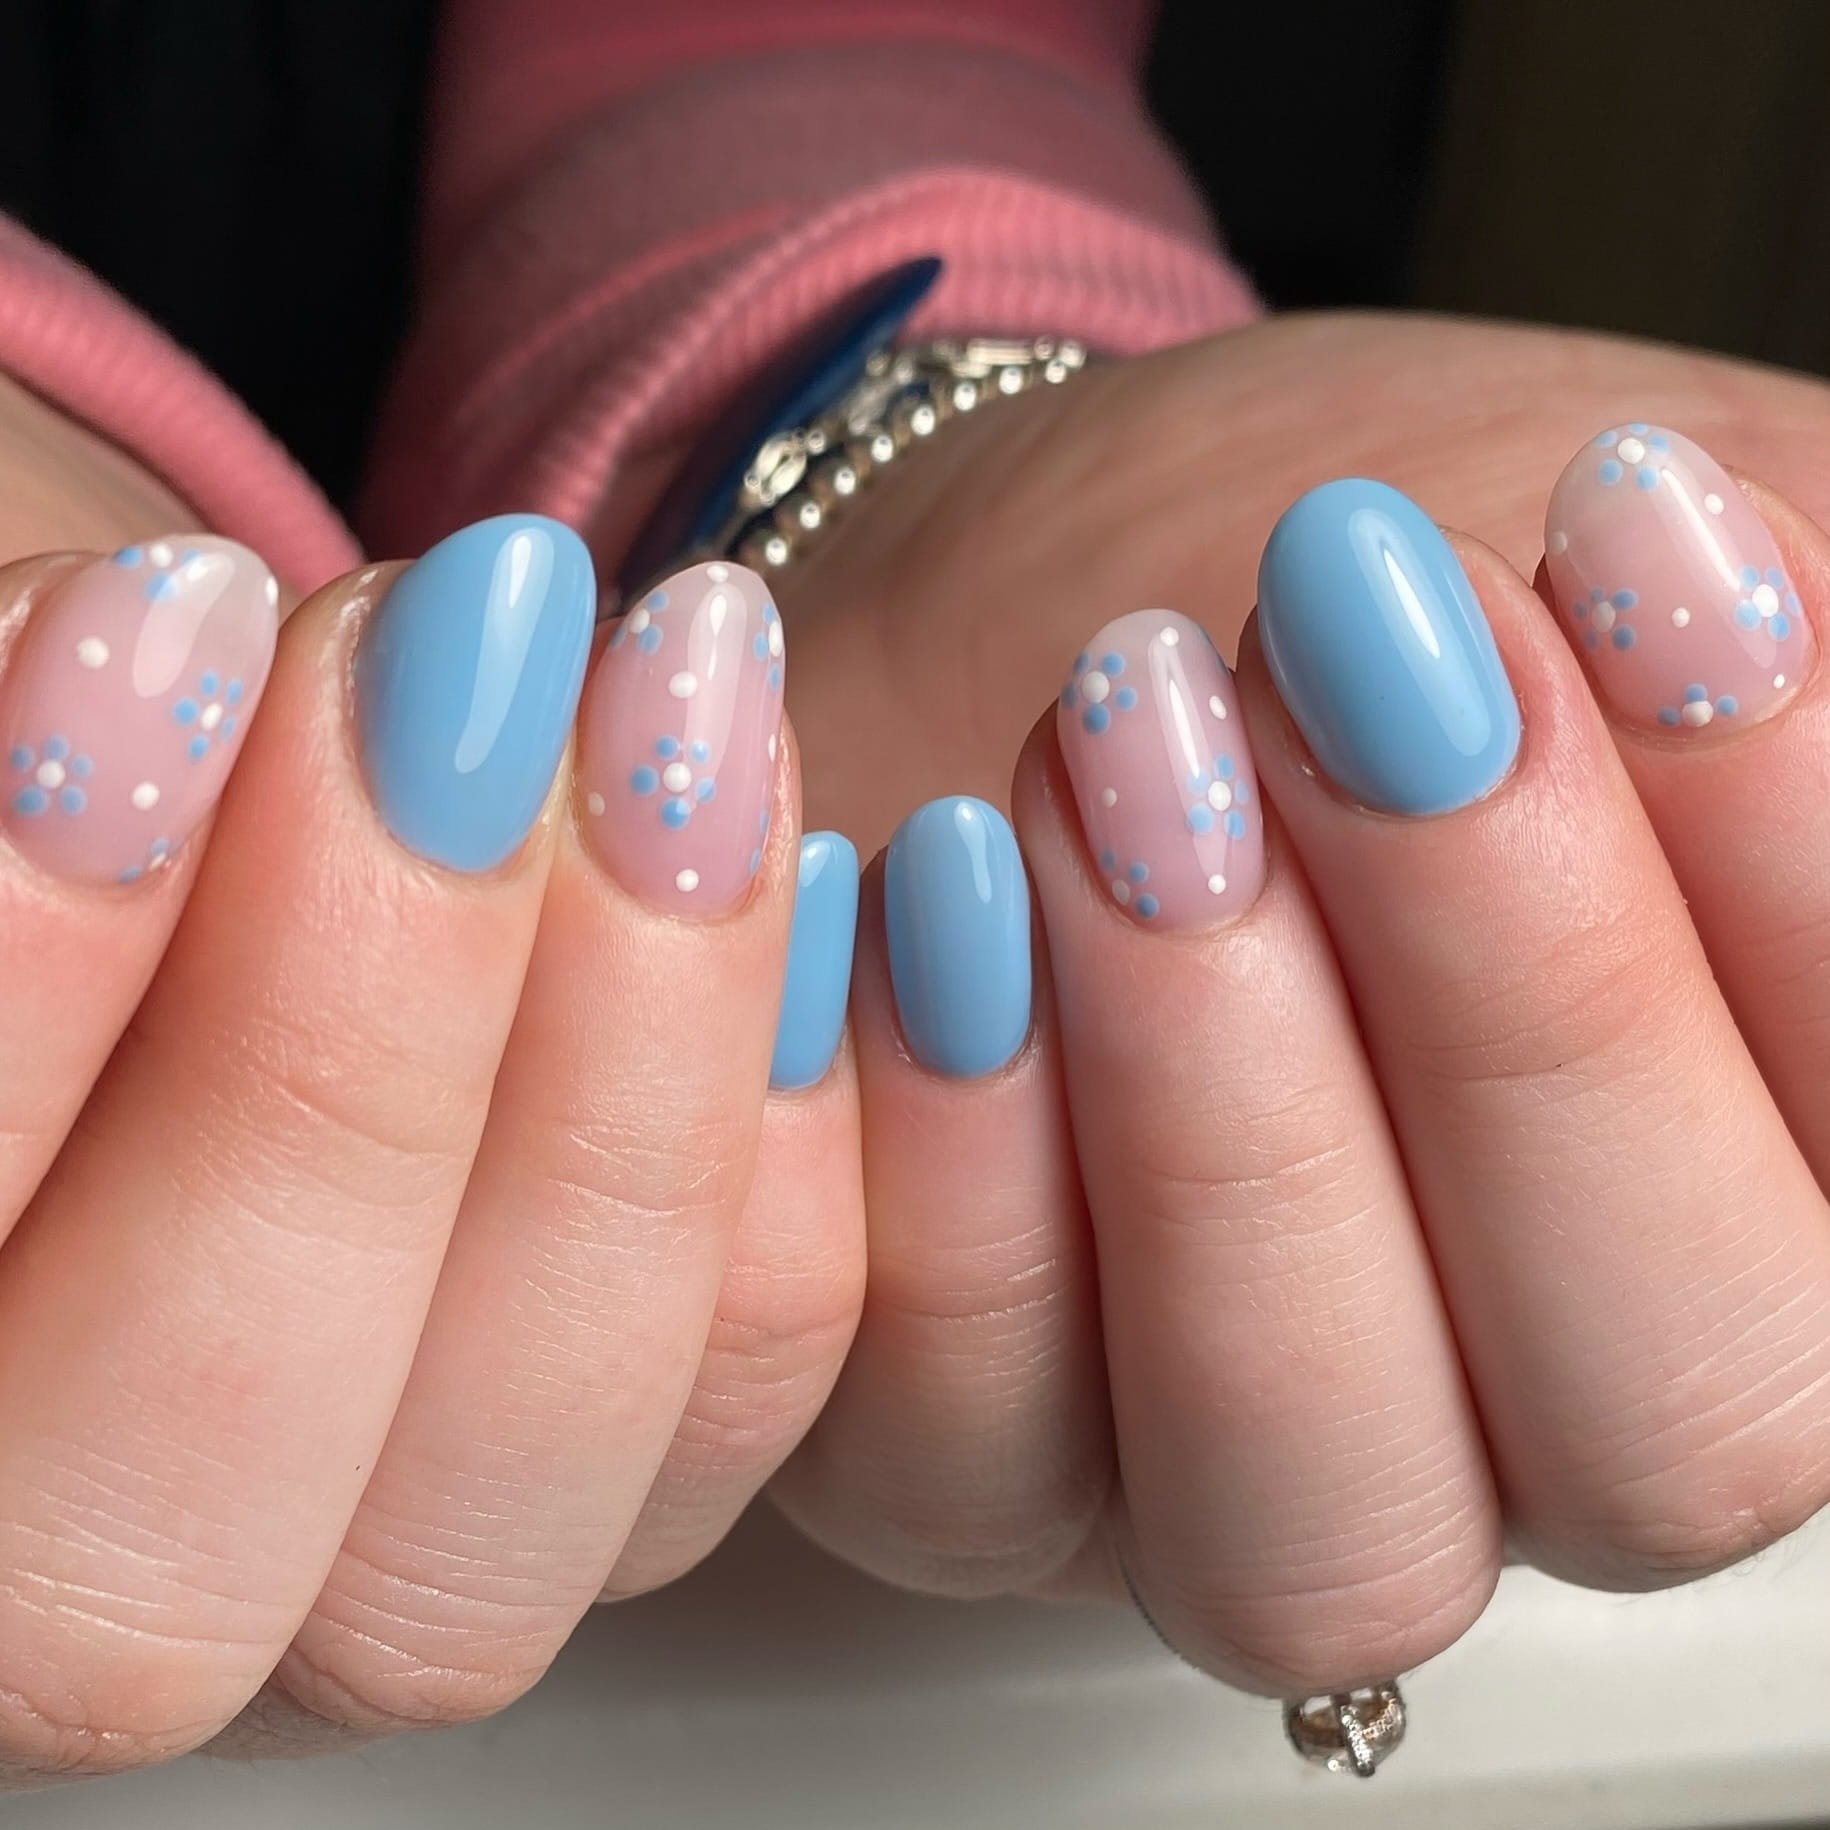 100 Pretty Spring Nail Designs To Try This Year images 77